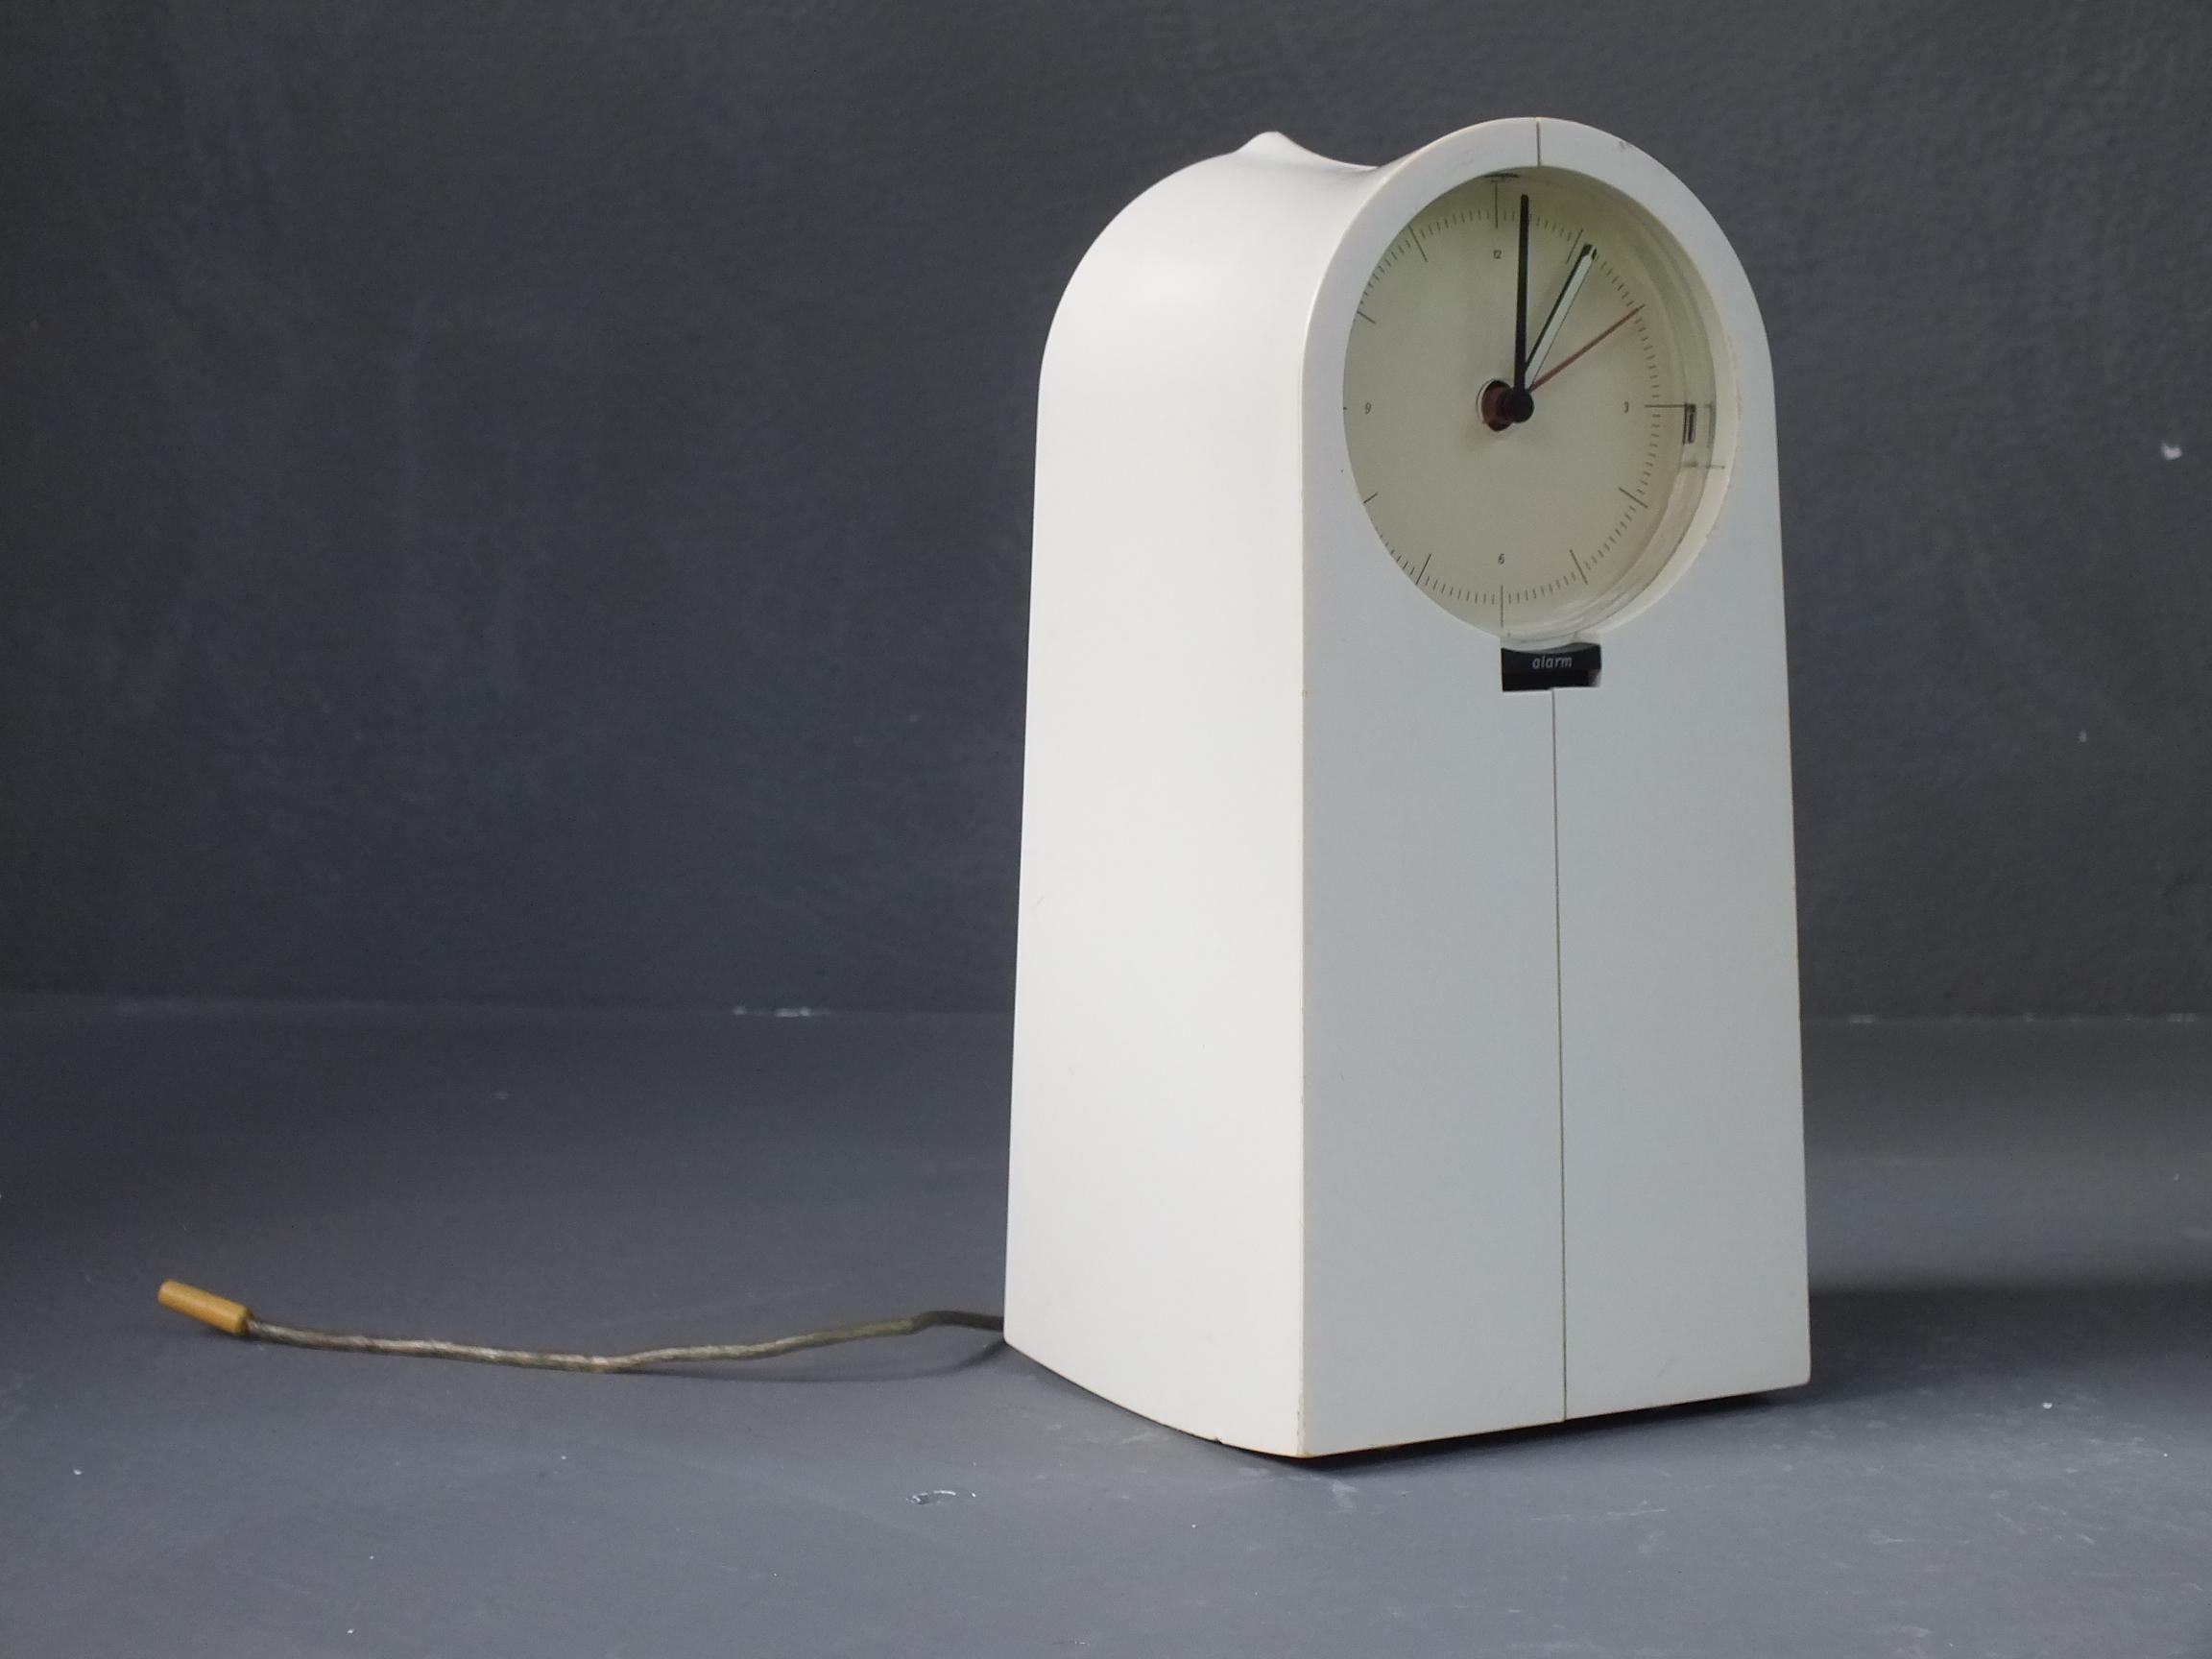 Late 20th Century Thomson Prod. Alessi Clock Radio Coo Coo by Pilippe Starck Design Year 1994 For Sale